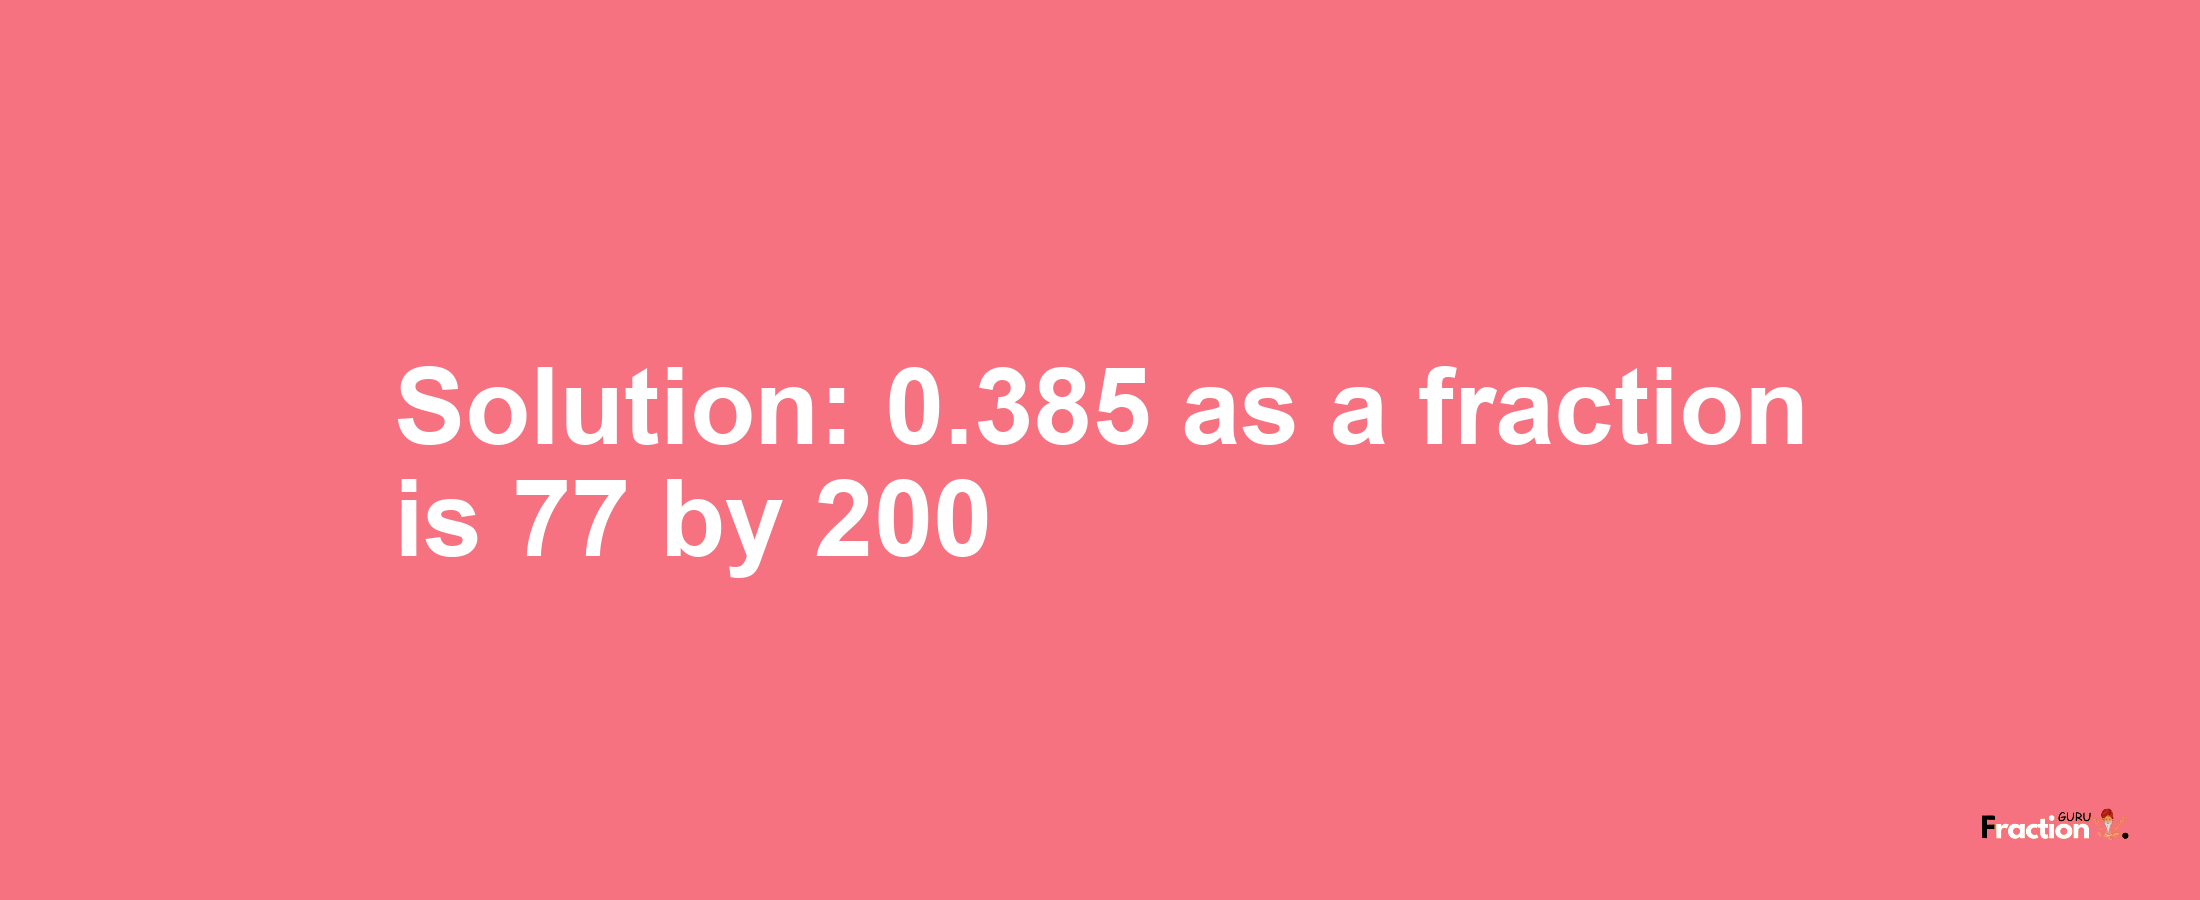 Solution:0.385 as a fraction is 77/200